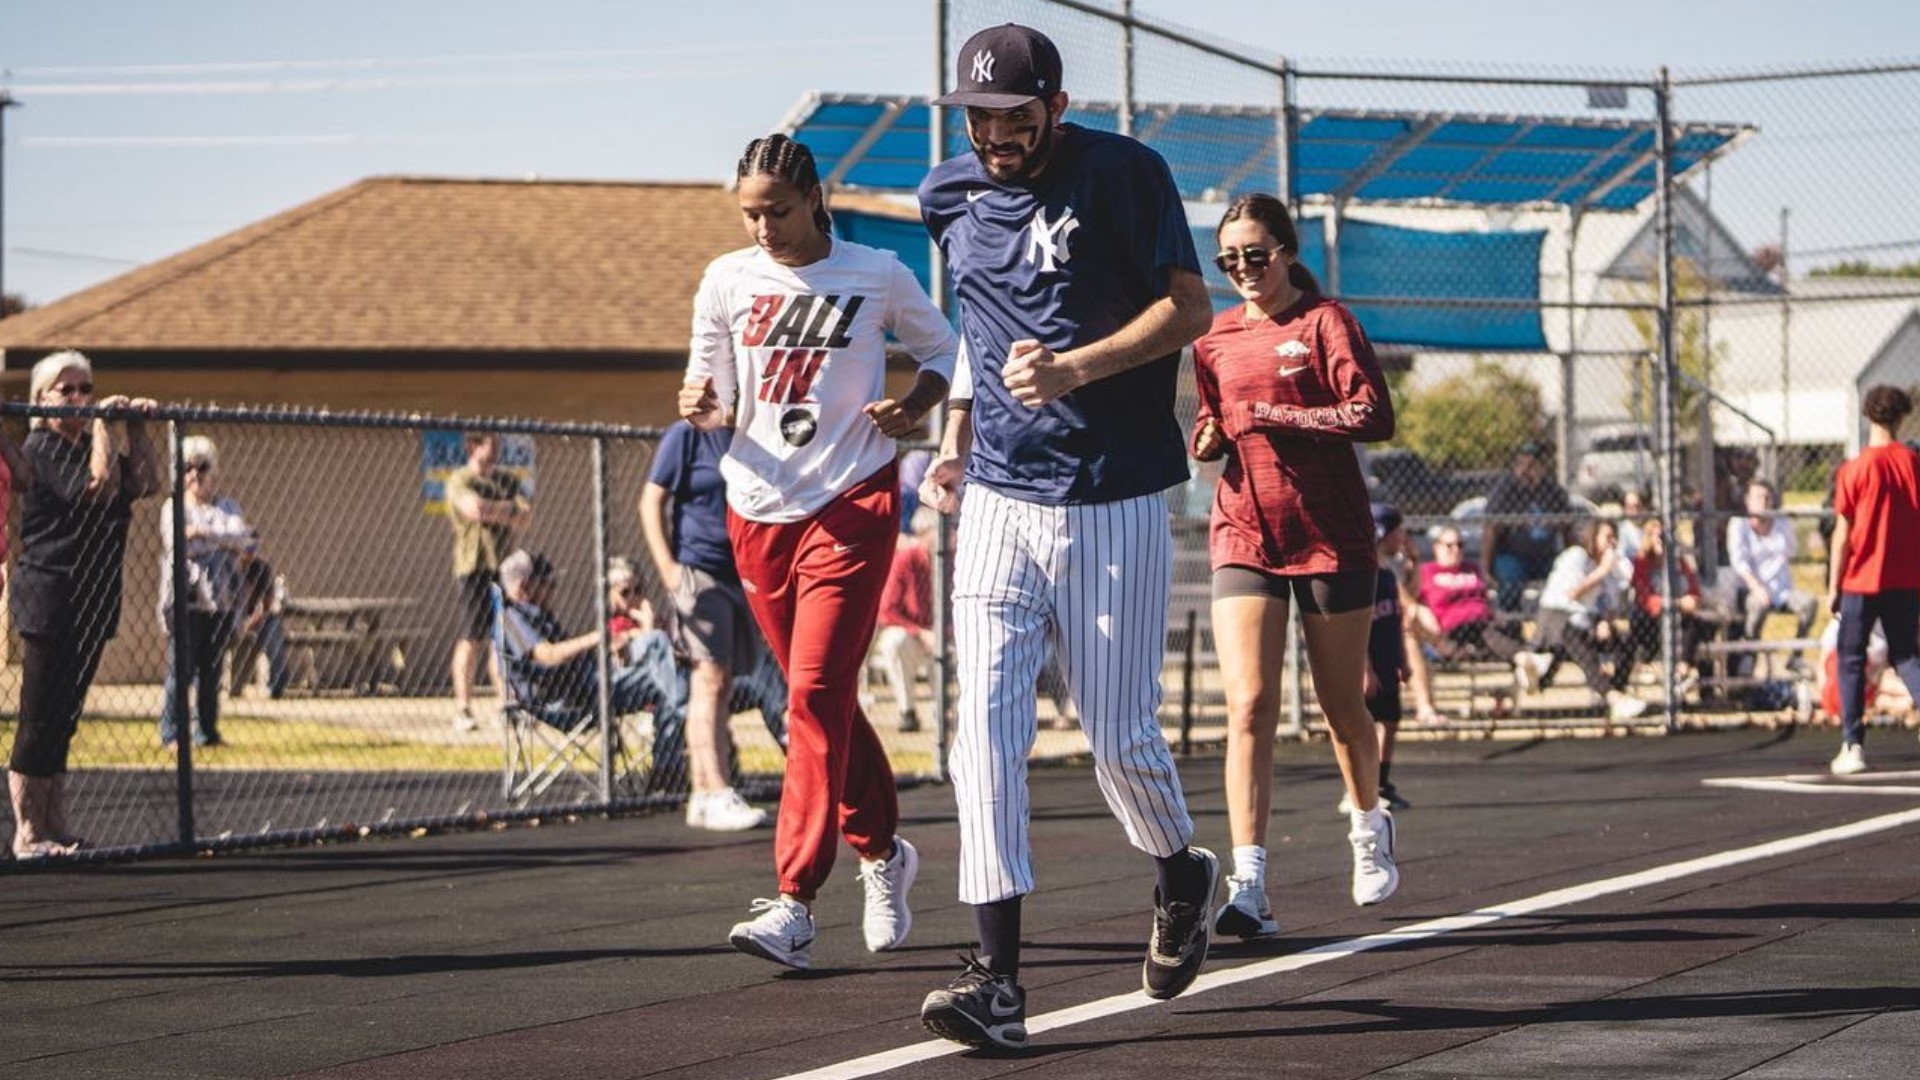 When some Arkansas softball players went to one of Kole Smith's Miracle League baseball games, it started a companionship that goes beyond the field.